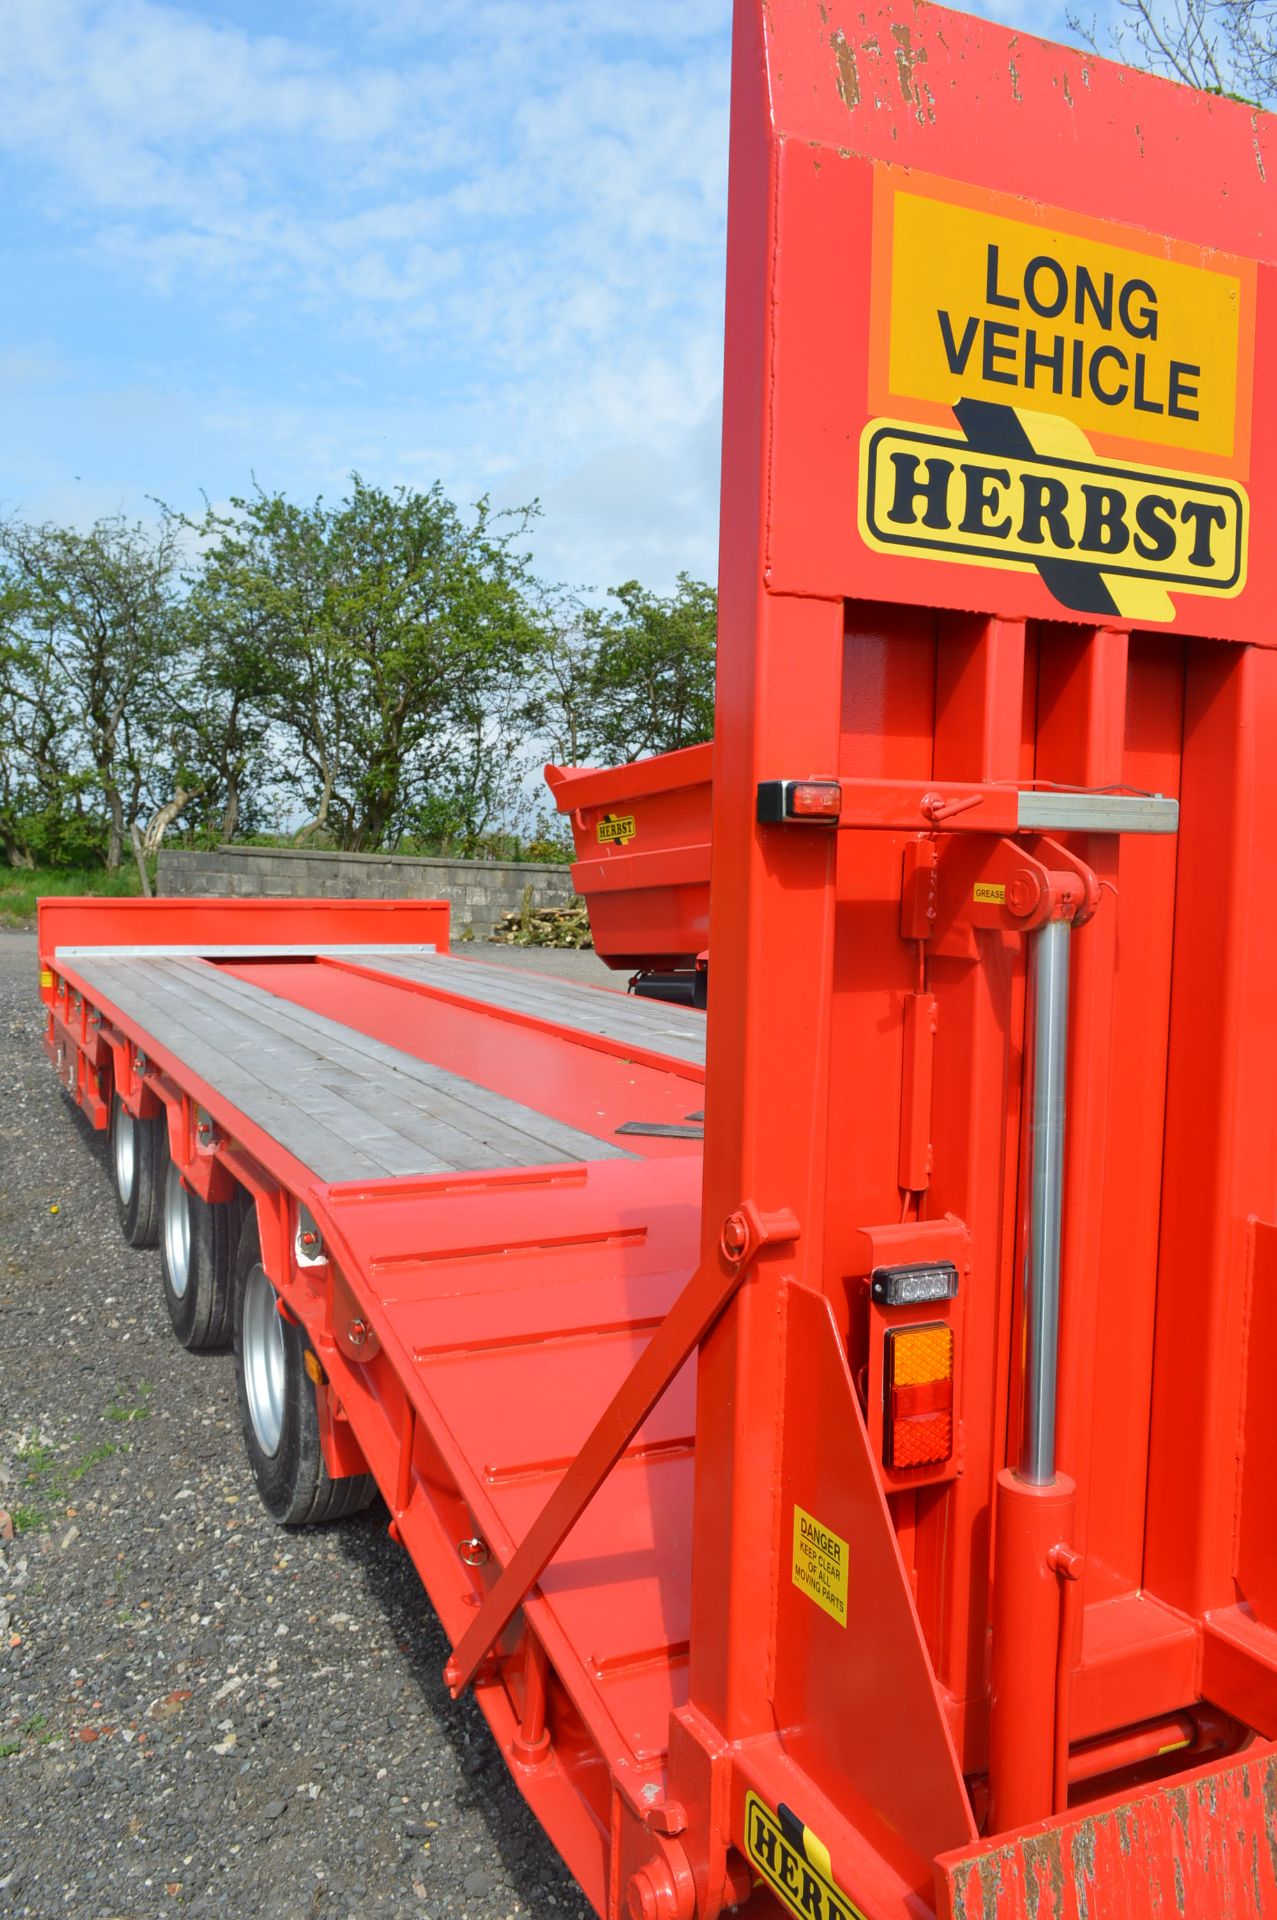 Herbst H/D TRI AXLE LOW LOADER TRAILER, serial no. PM65140142282H, year of manufacture 2016, 33, - Image 3 of 5